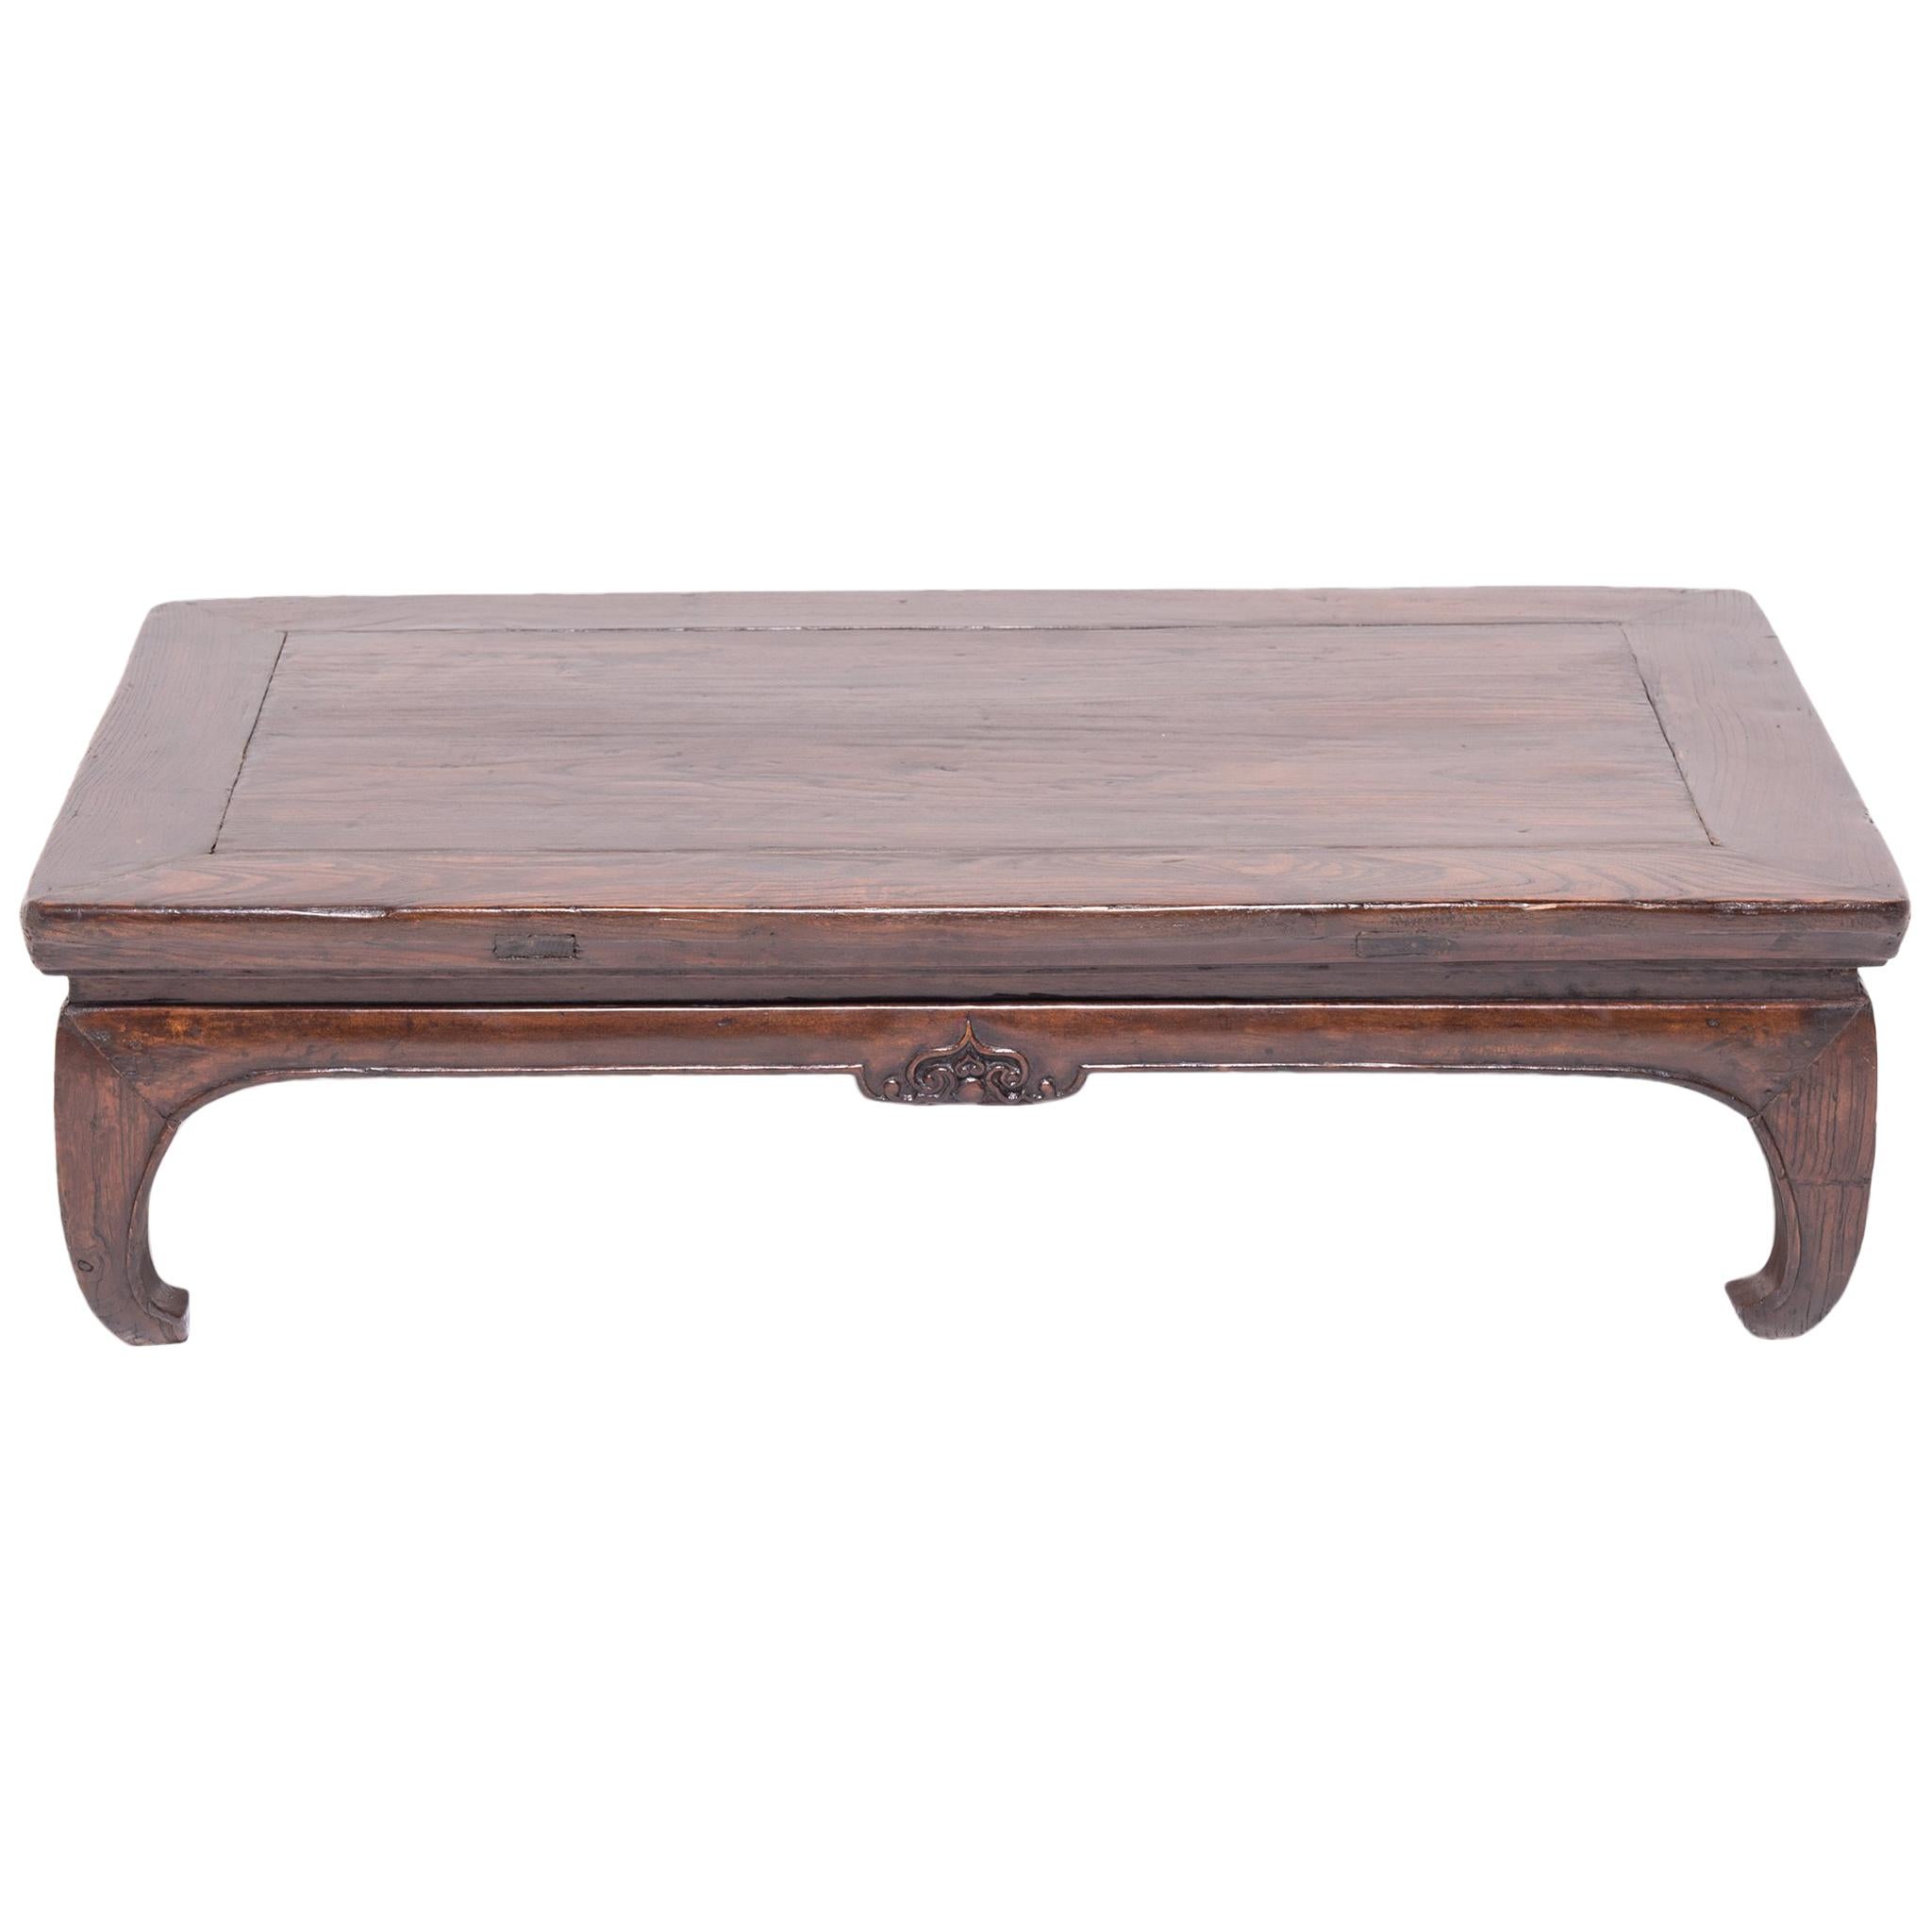 19th Century Chinese Low Kang Table